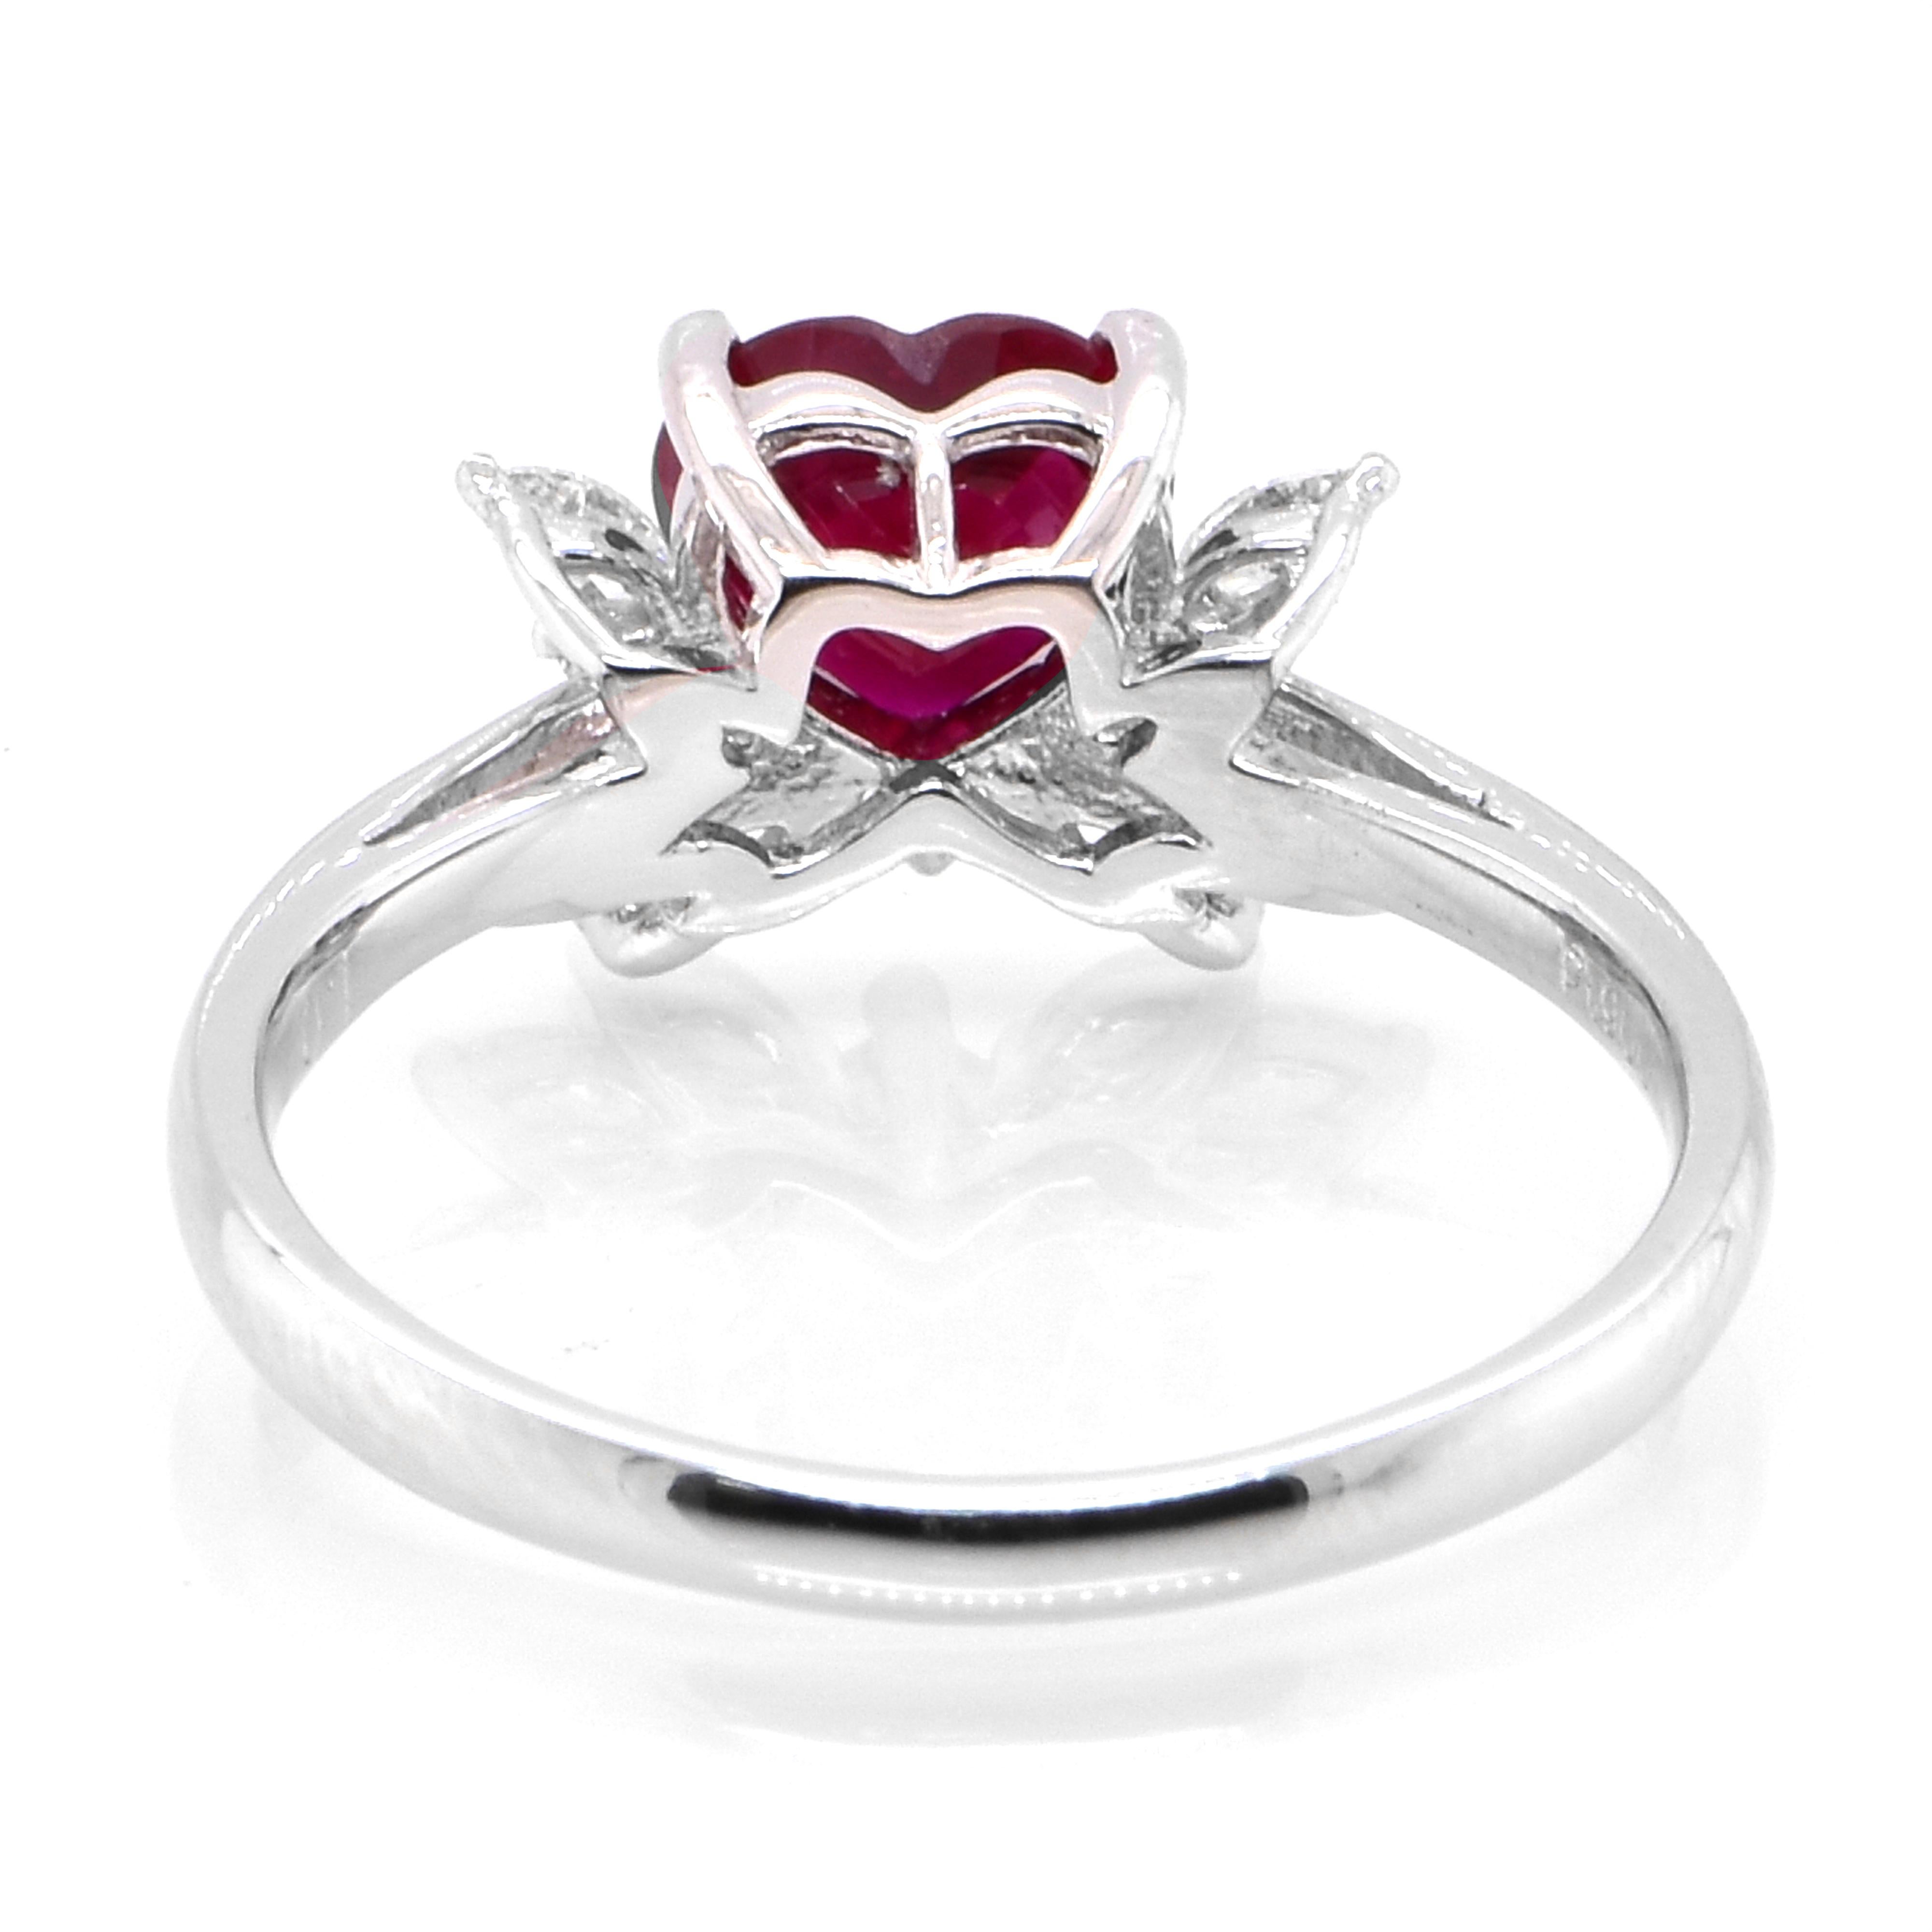 Heart Cut GIA Certified 1.04 Carat, Pigeon Blood Red, Burmese Ruby Ring Made in Platinum For Sale